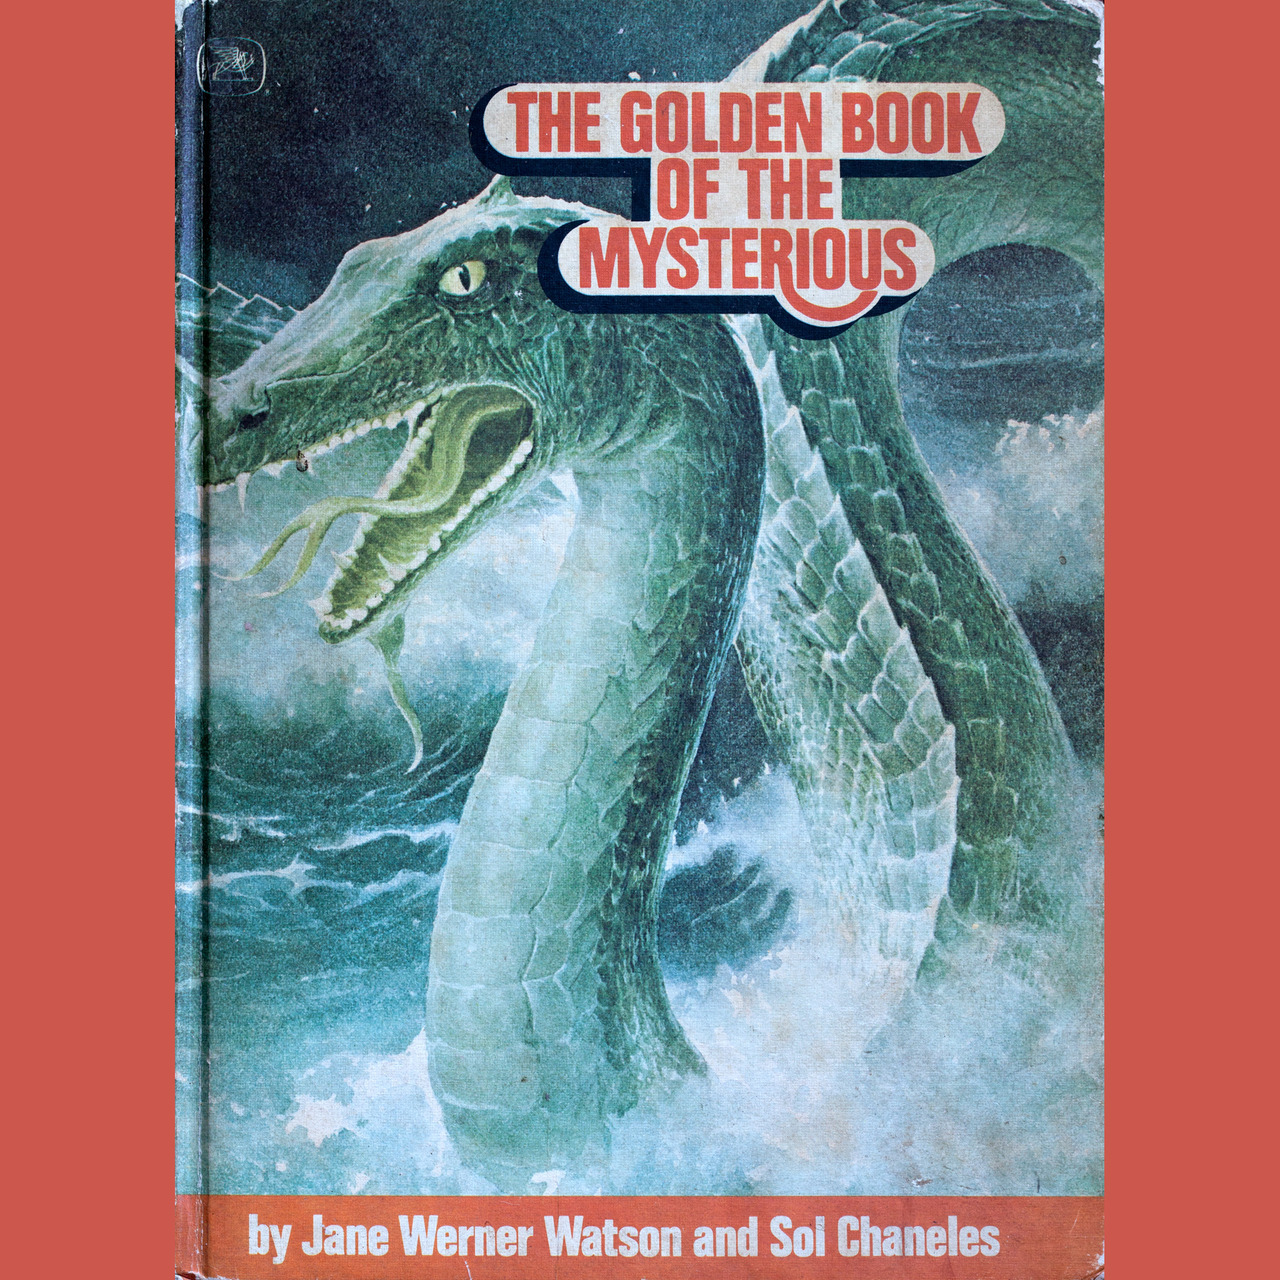 The Golden Book of the Mysterious